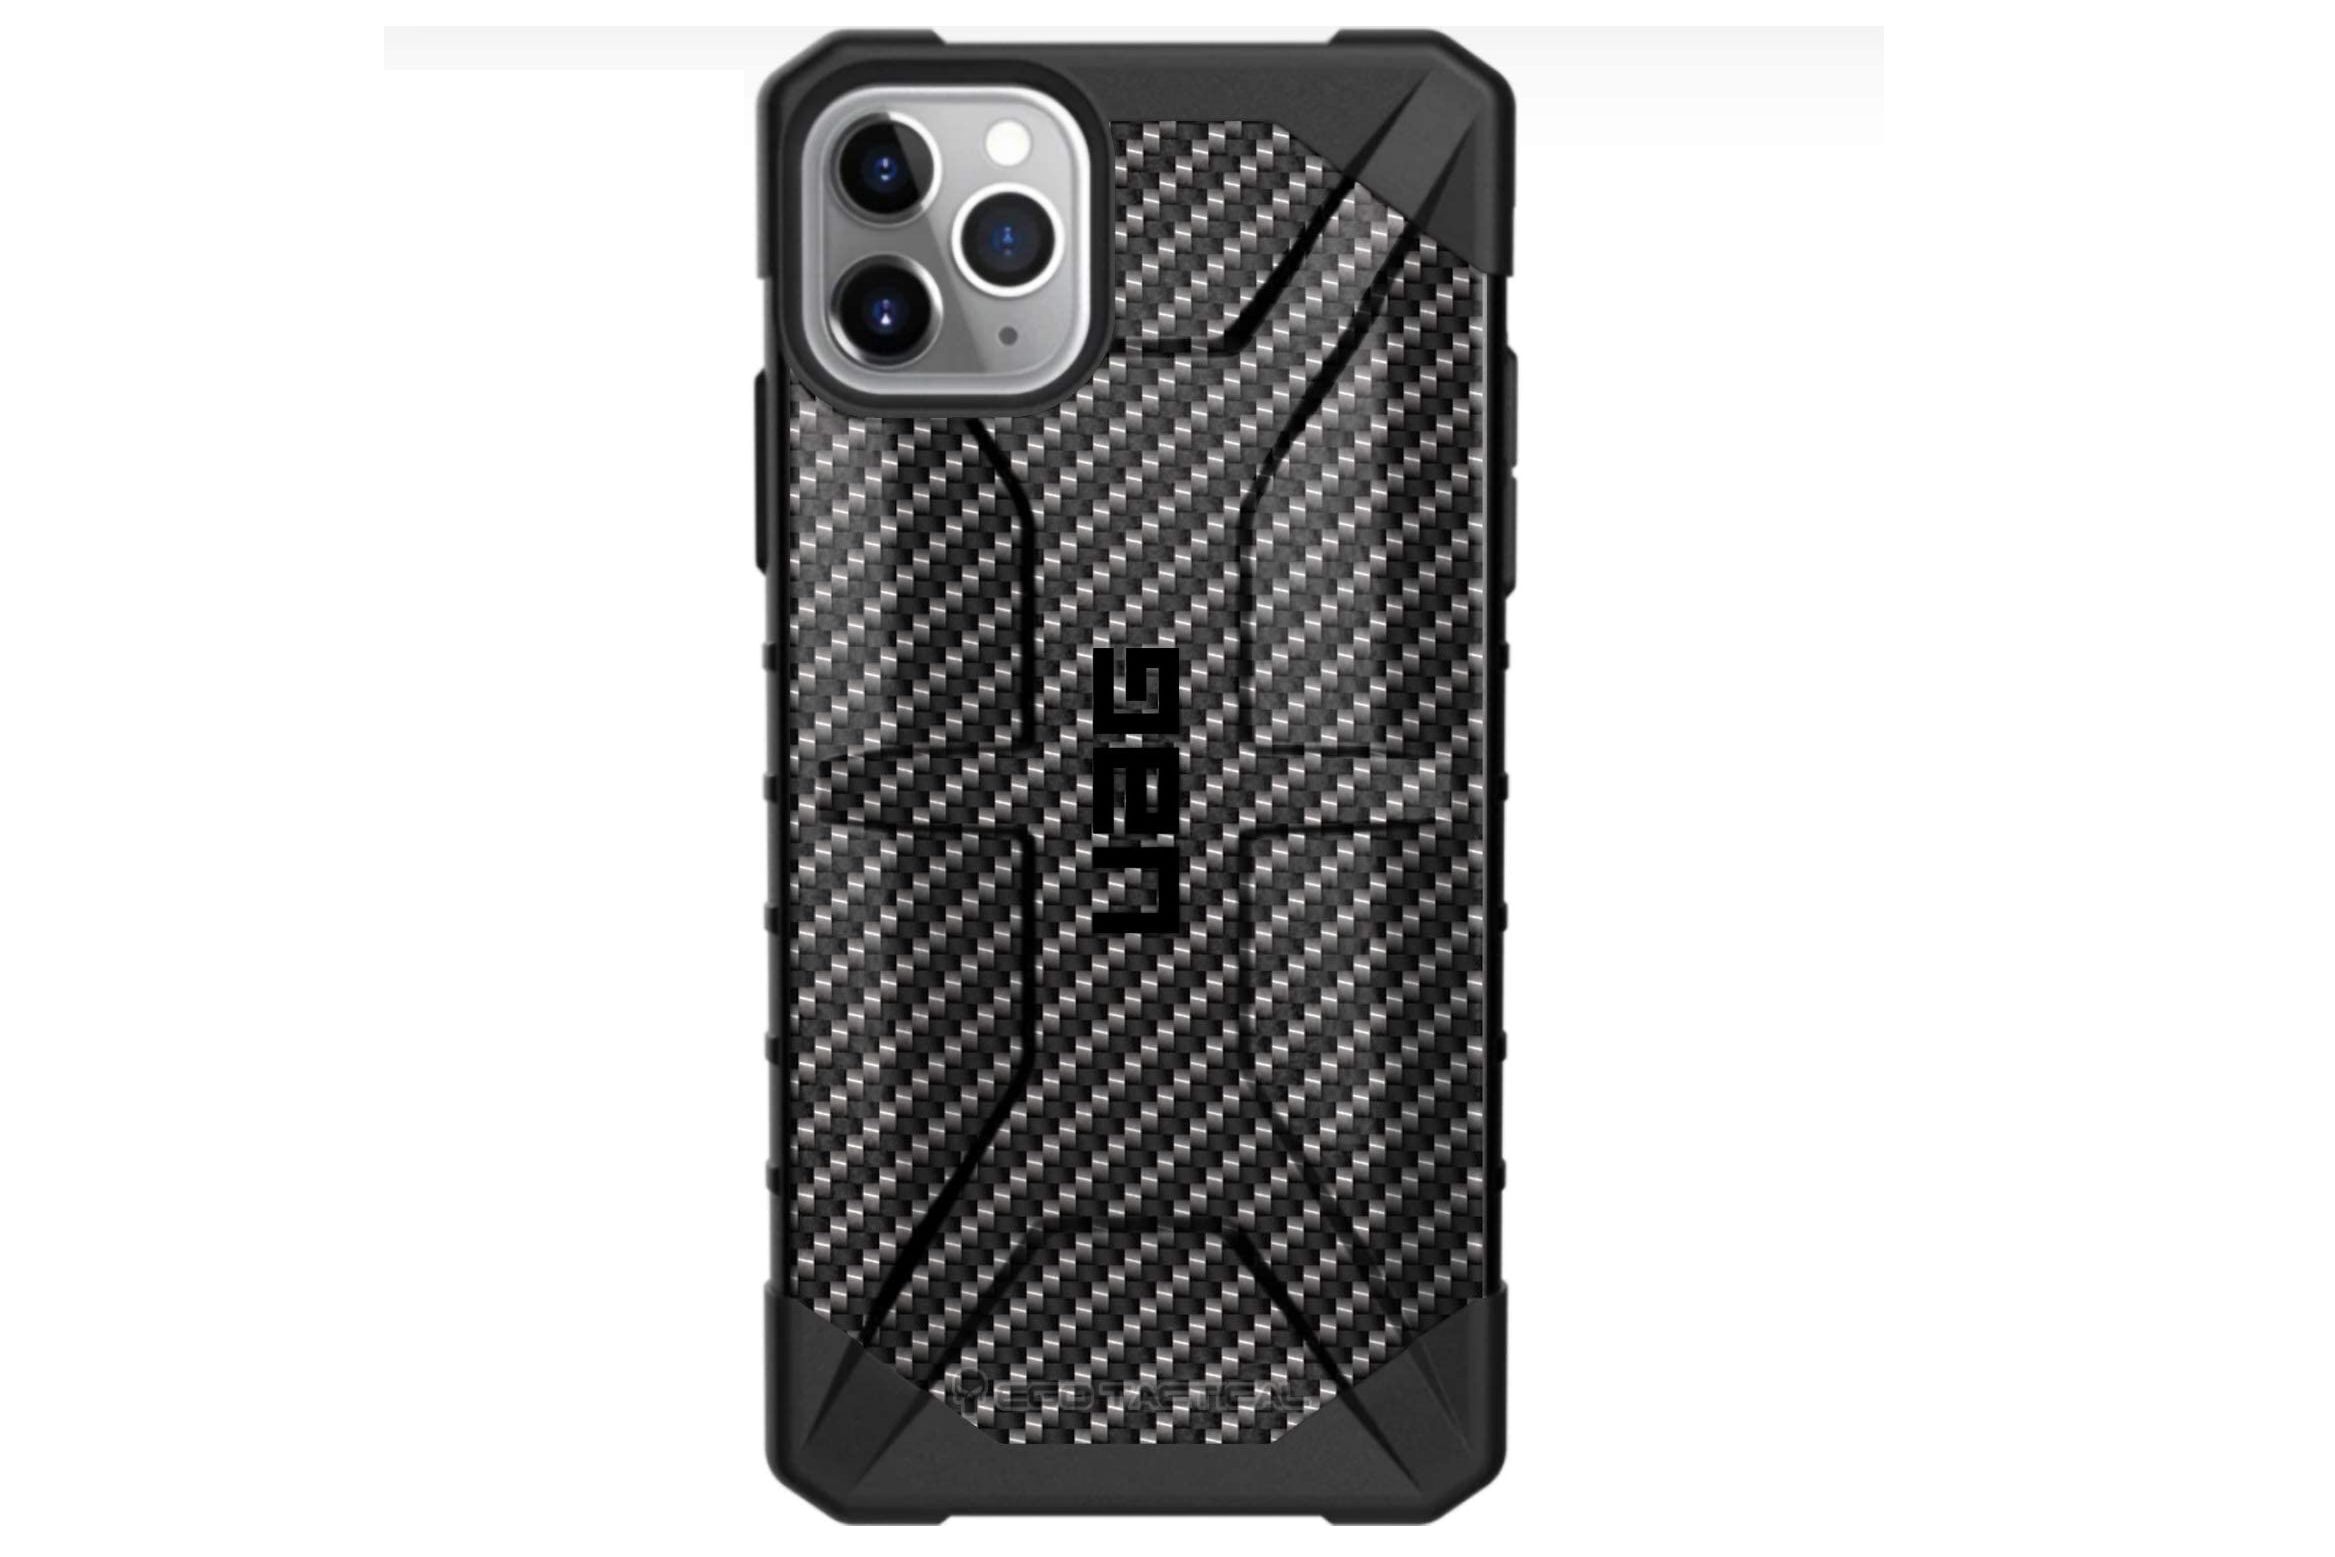 UAG Limited Edition iPhone 12 Pro Max case by EGO Tactical - The best iPhone 12 Pro Max cases in 2022 - updated October